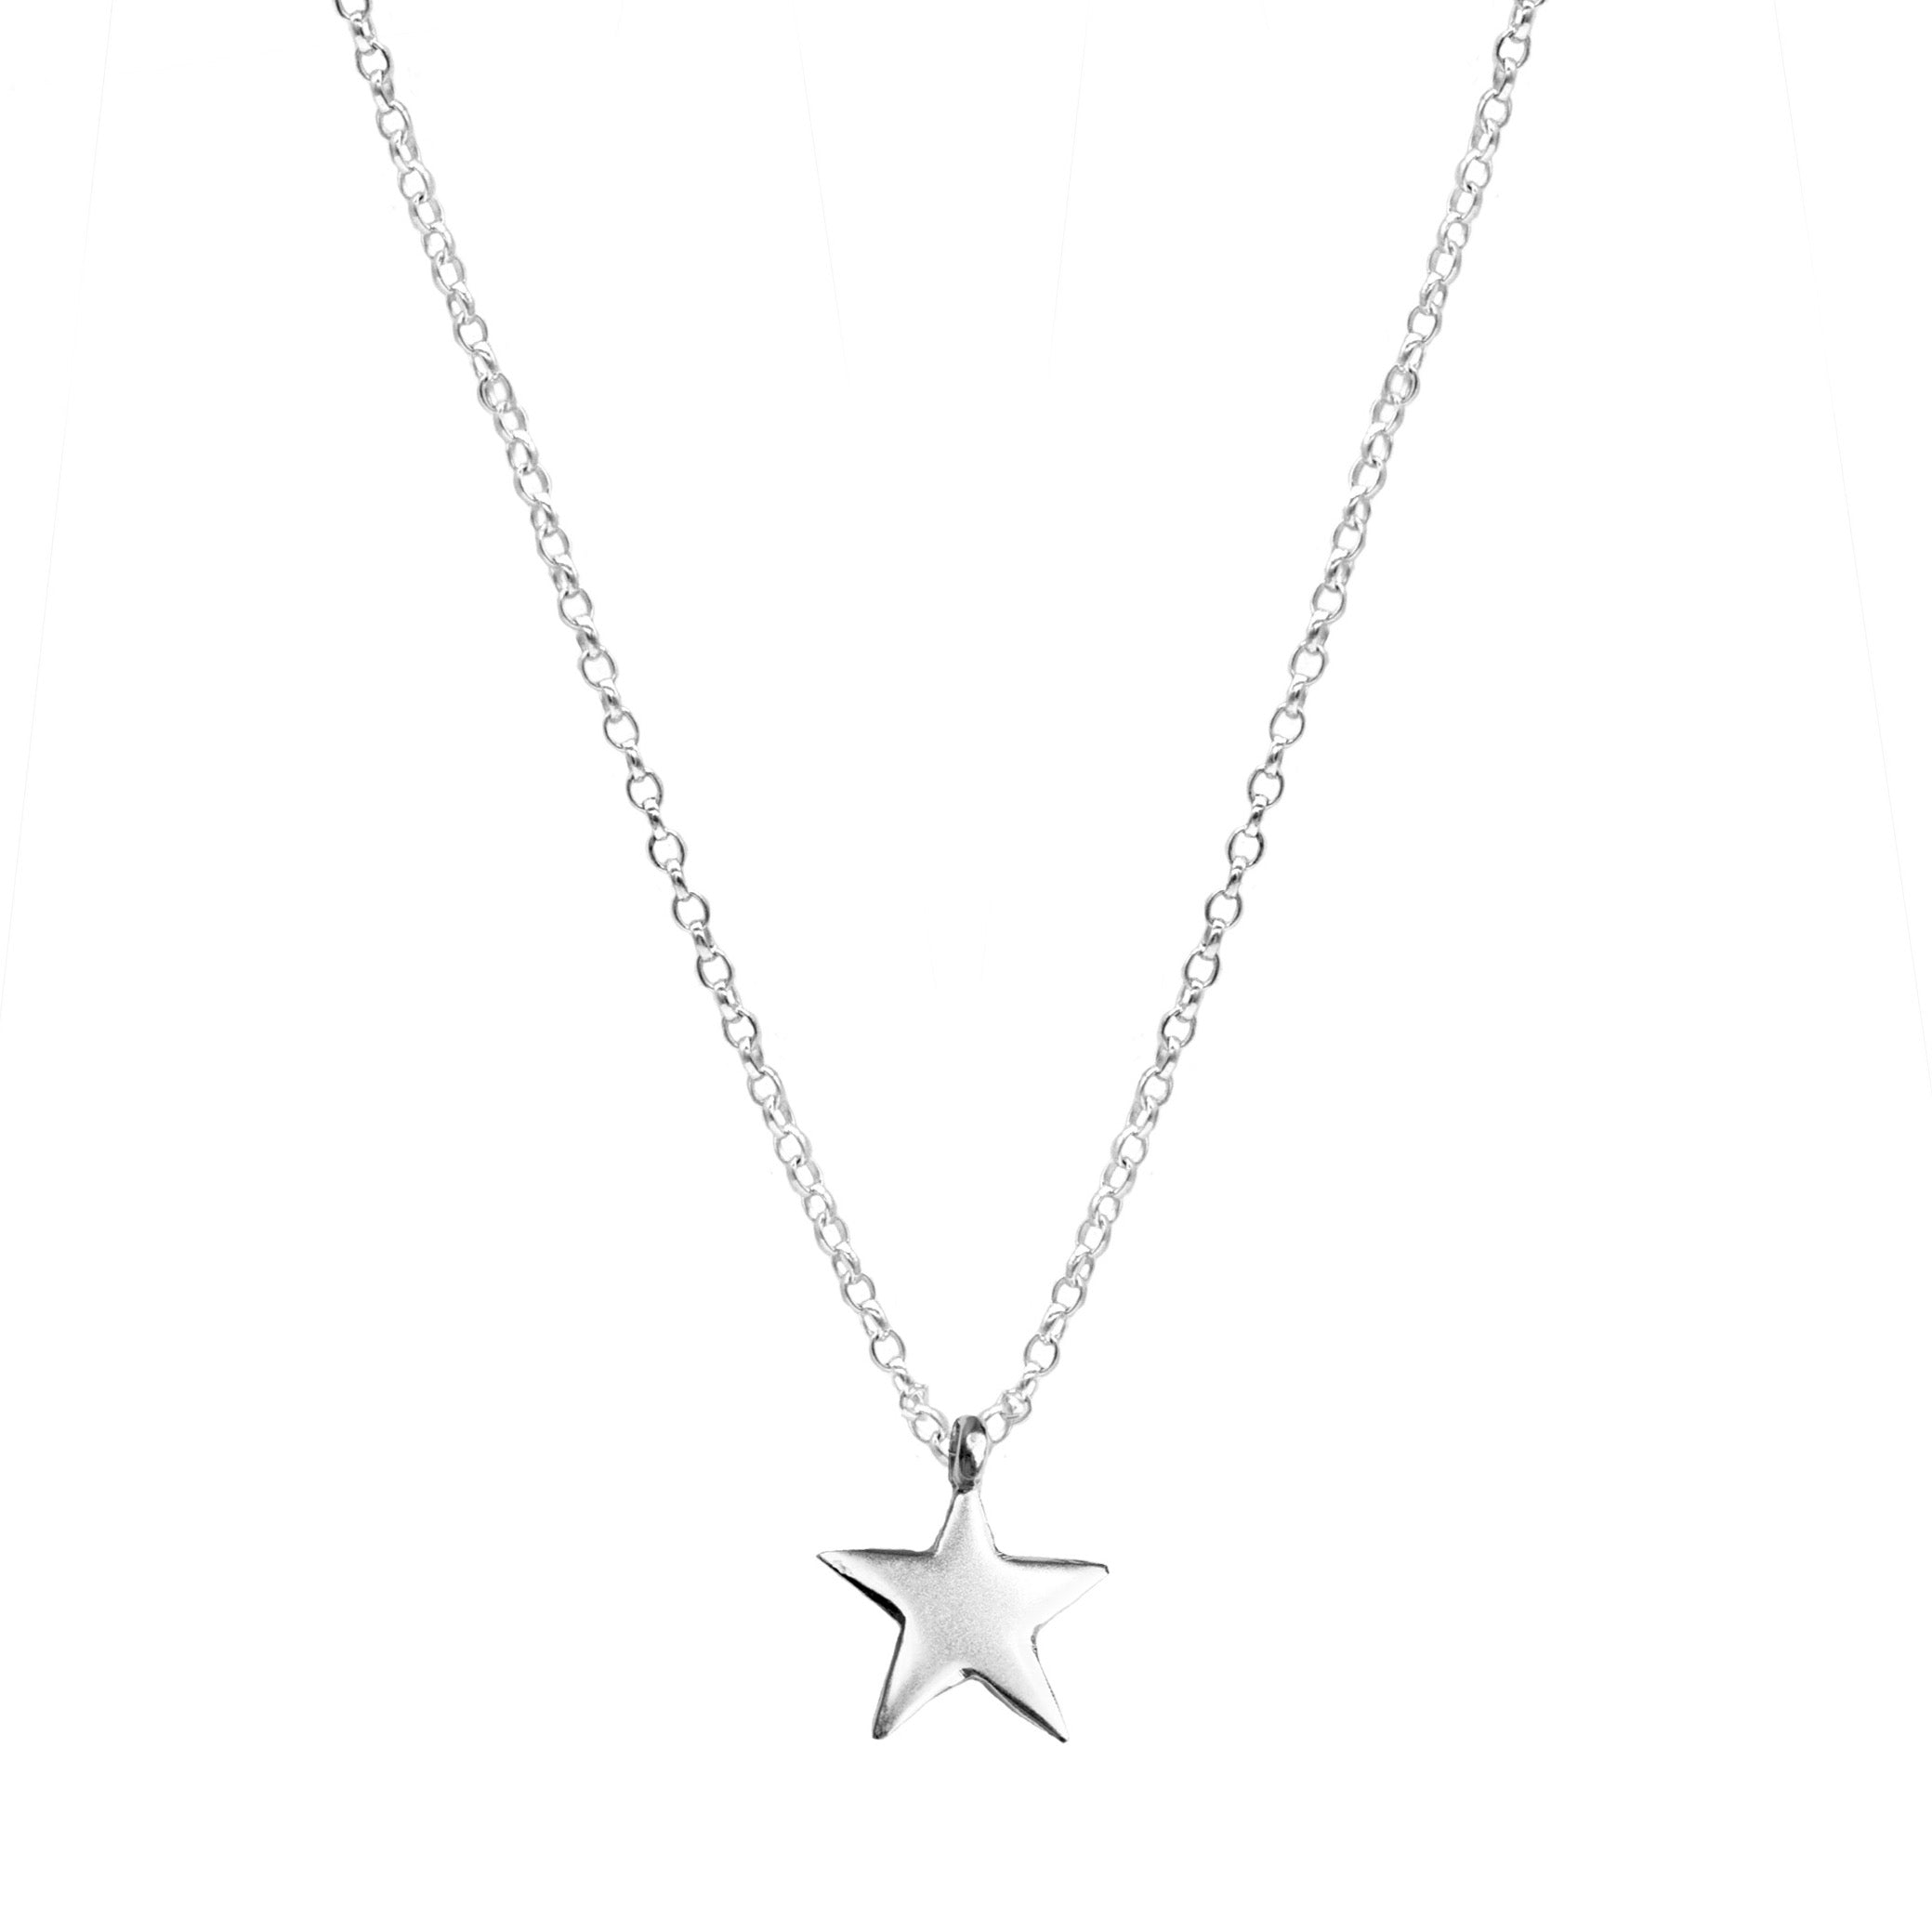 Belle & Bee Sterling Silver Necklace with Midi Chunky Star Charm